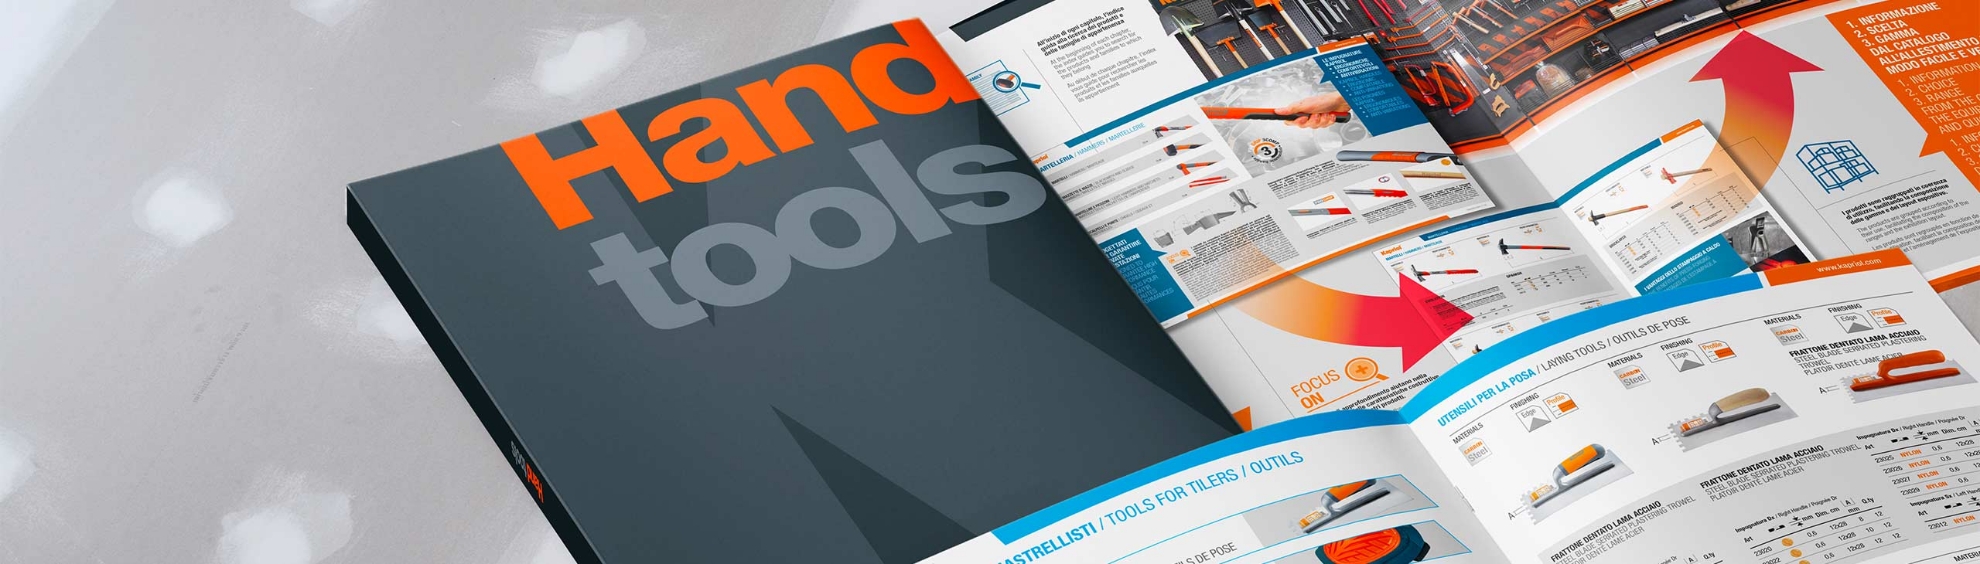 New Hand Tools catalogue, everything you need at a glance